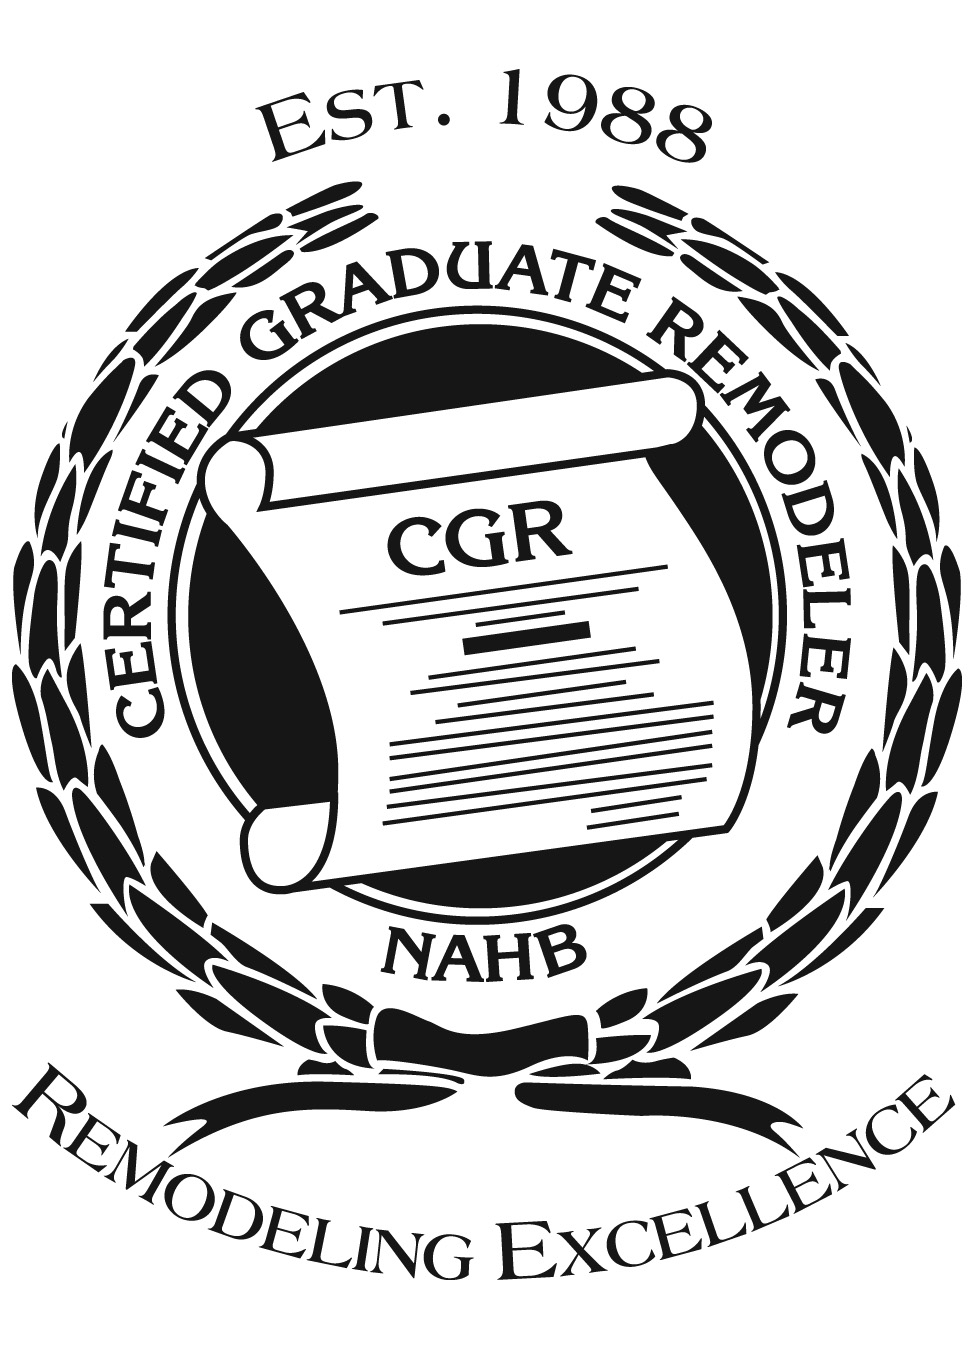 Certified Graduate Remodeler, from NAHB